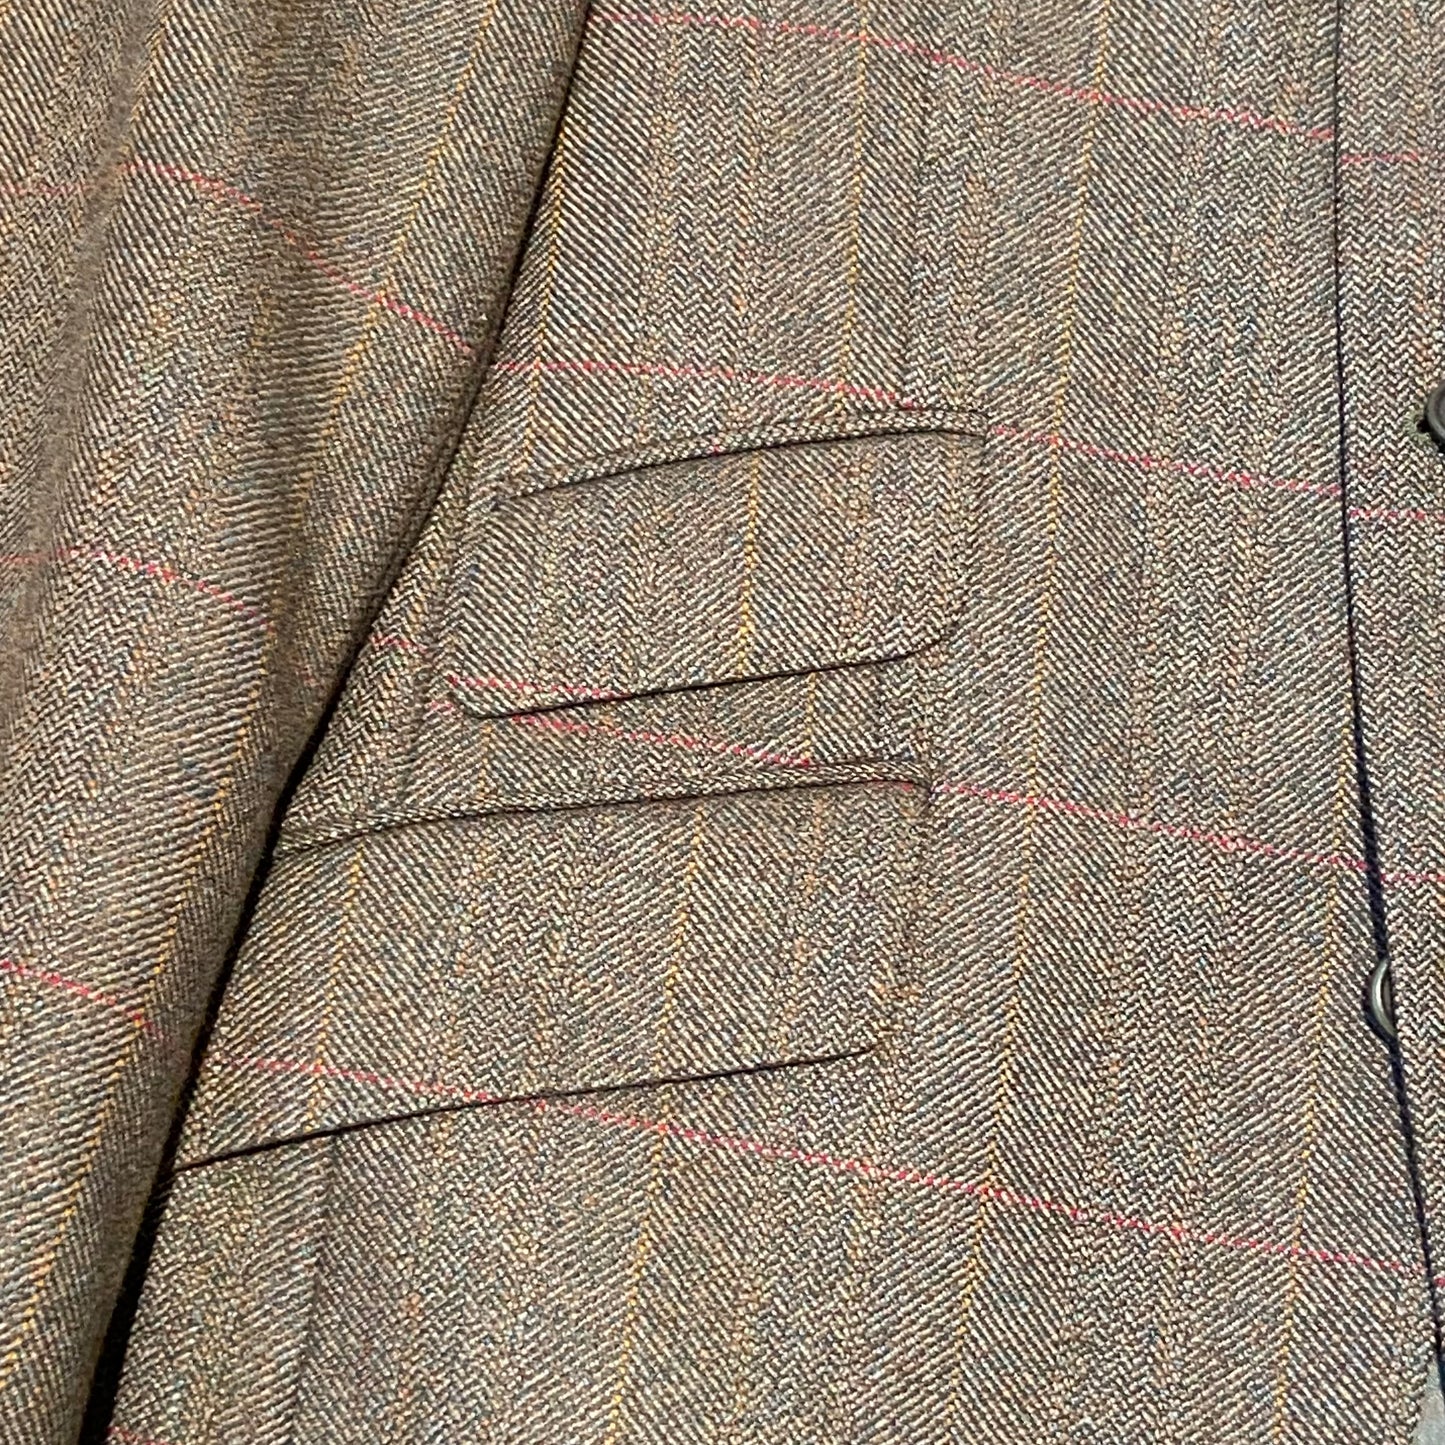 Classic windowpane check tweed suit by Magee, 38 chest, 34 waist